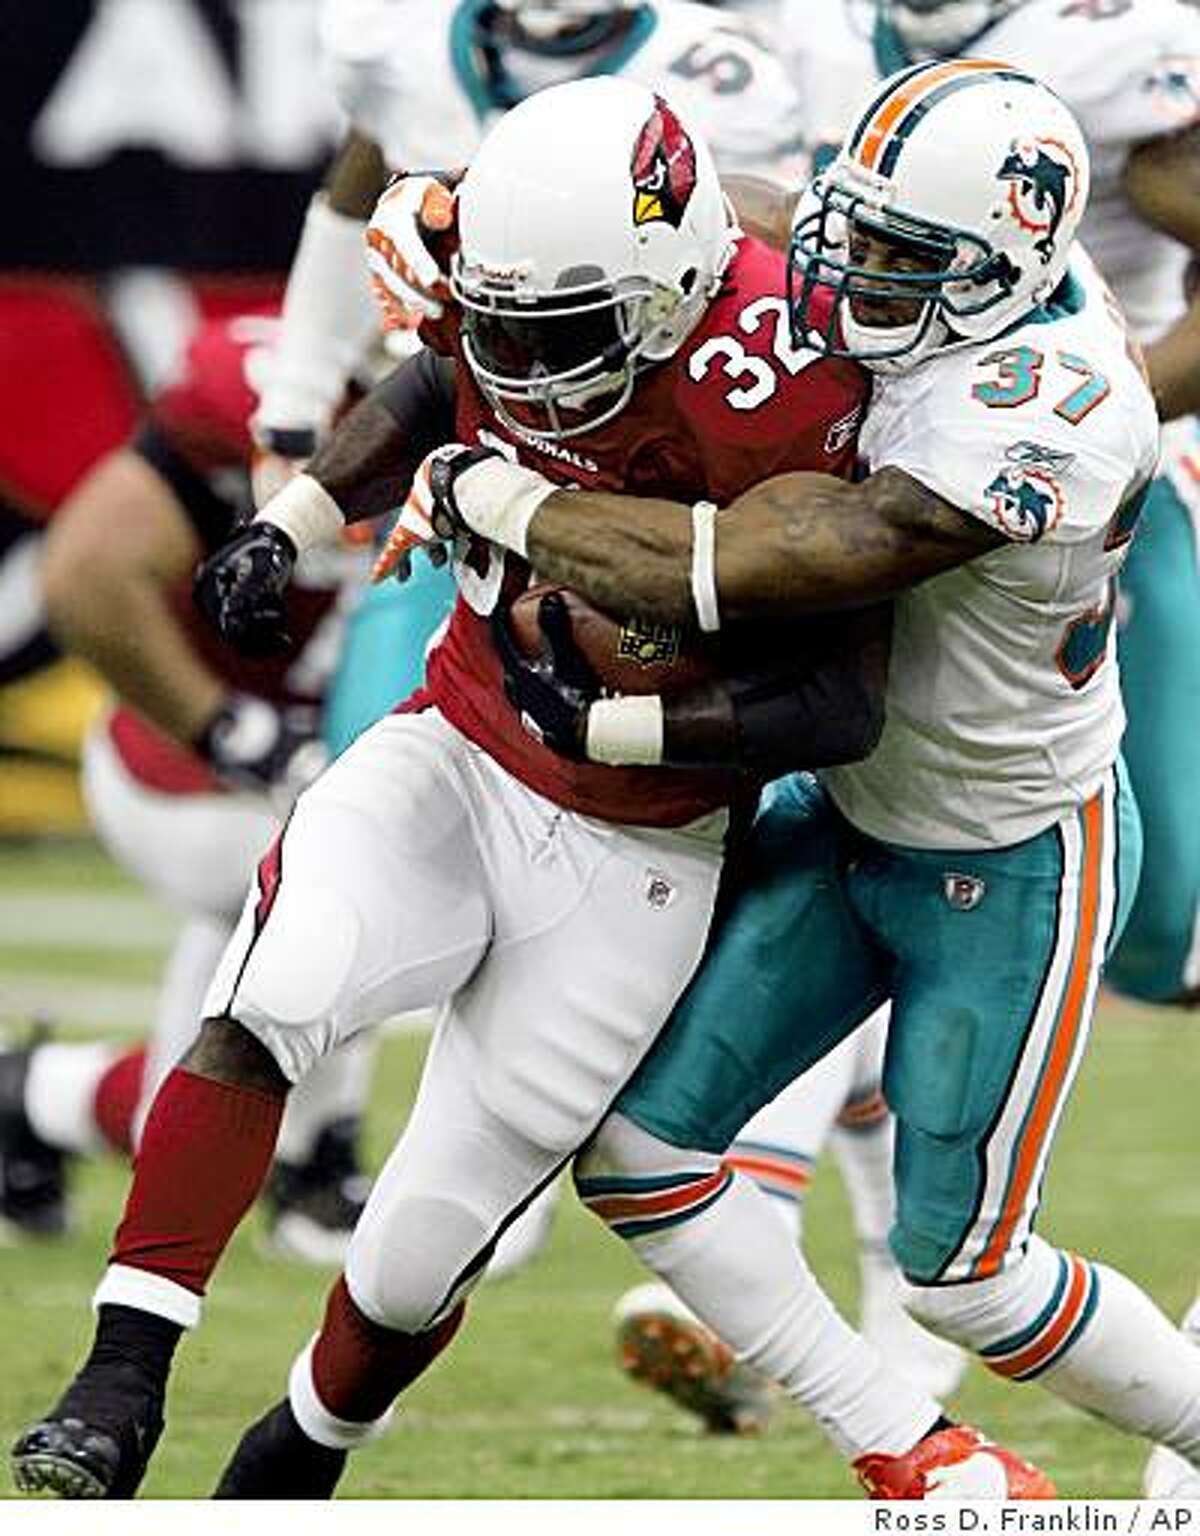 Miami Dolphins' Yeremiah Bell (37) tackles Arizona Cardinals' Edgerrin James (32) in the first quarter of a football game Sunday, Sept. 14, 2008, in Glendale, Ariz. The Cardinals defeated the Dolphins 31-10. (AP Photo/Ross D. Franklin)